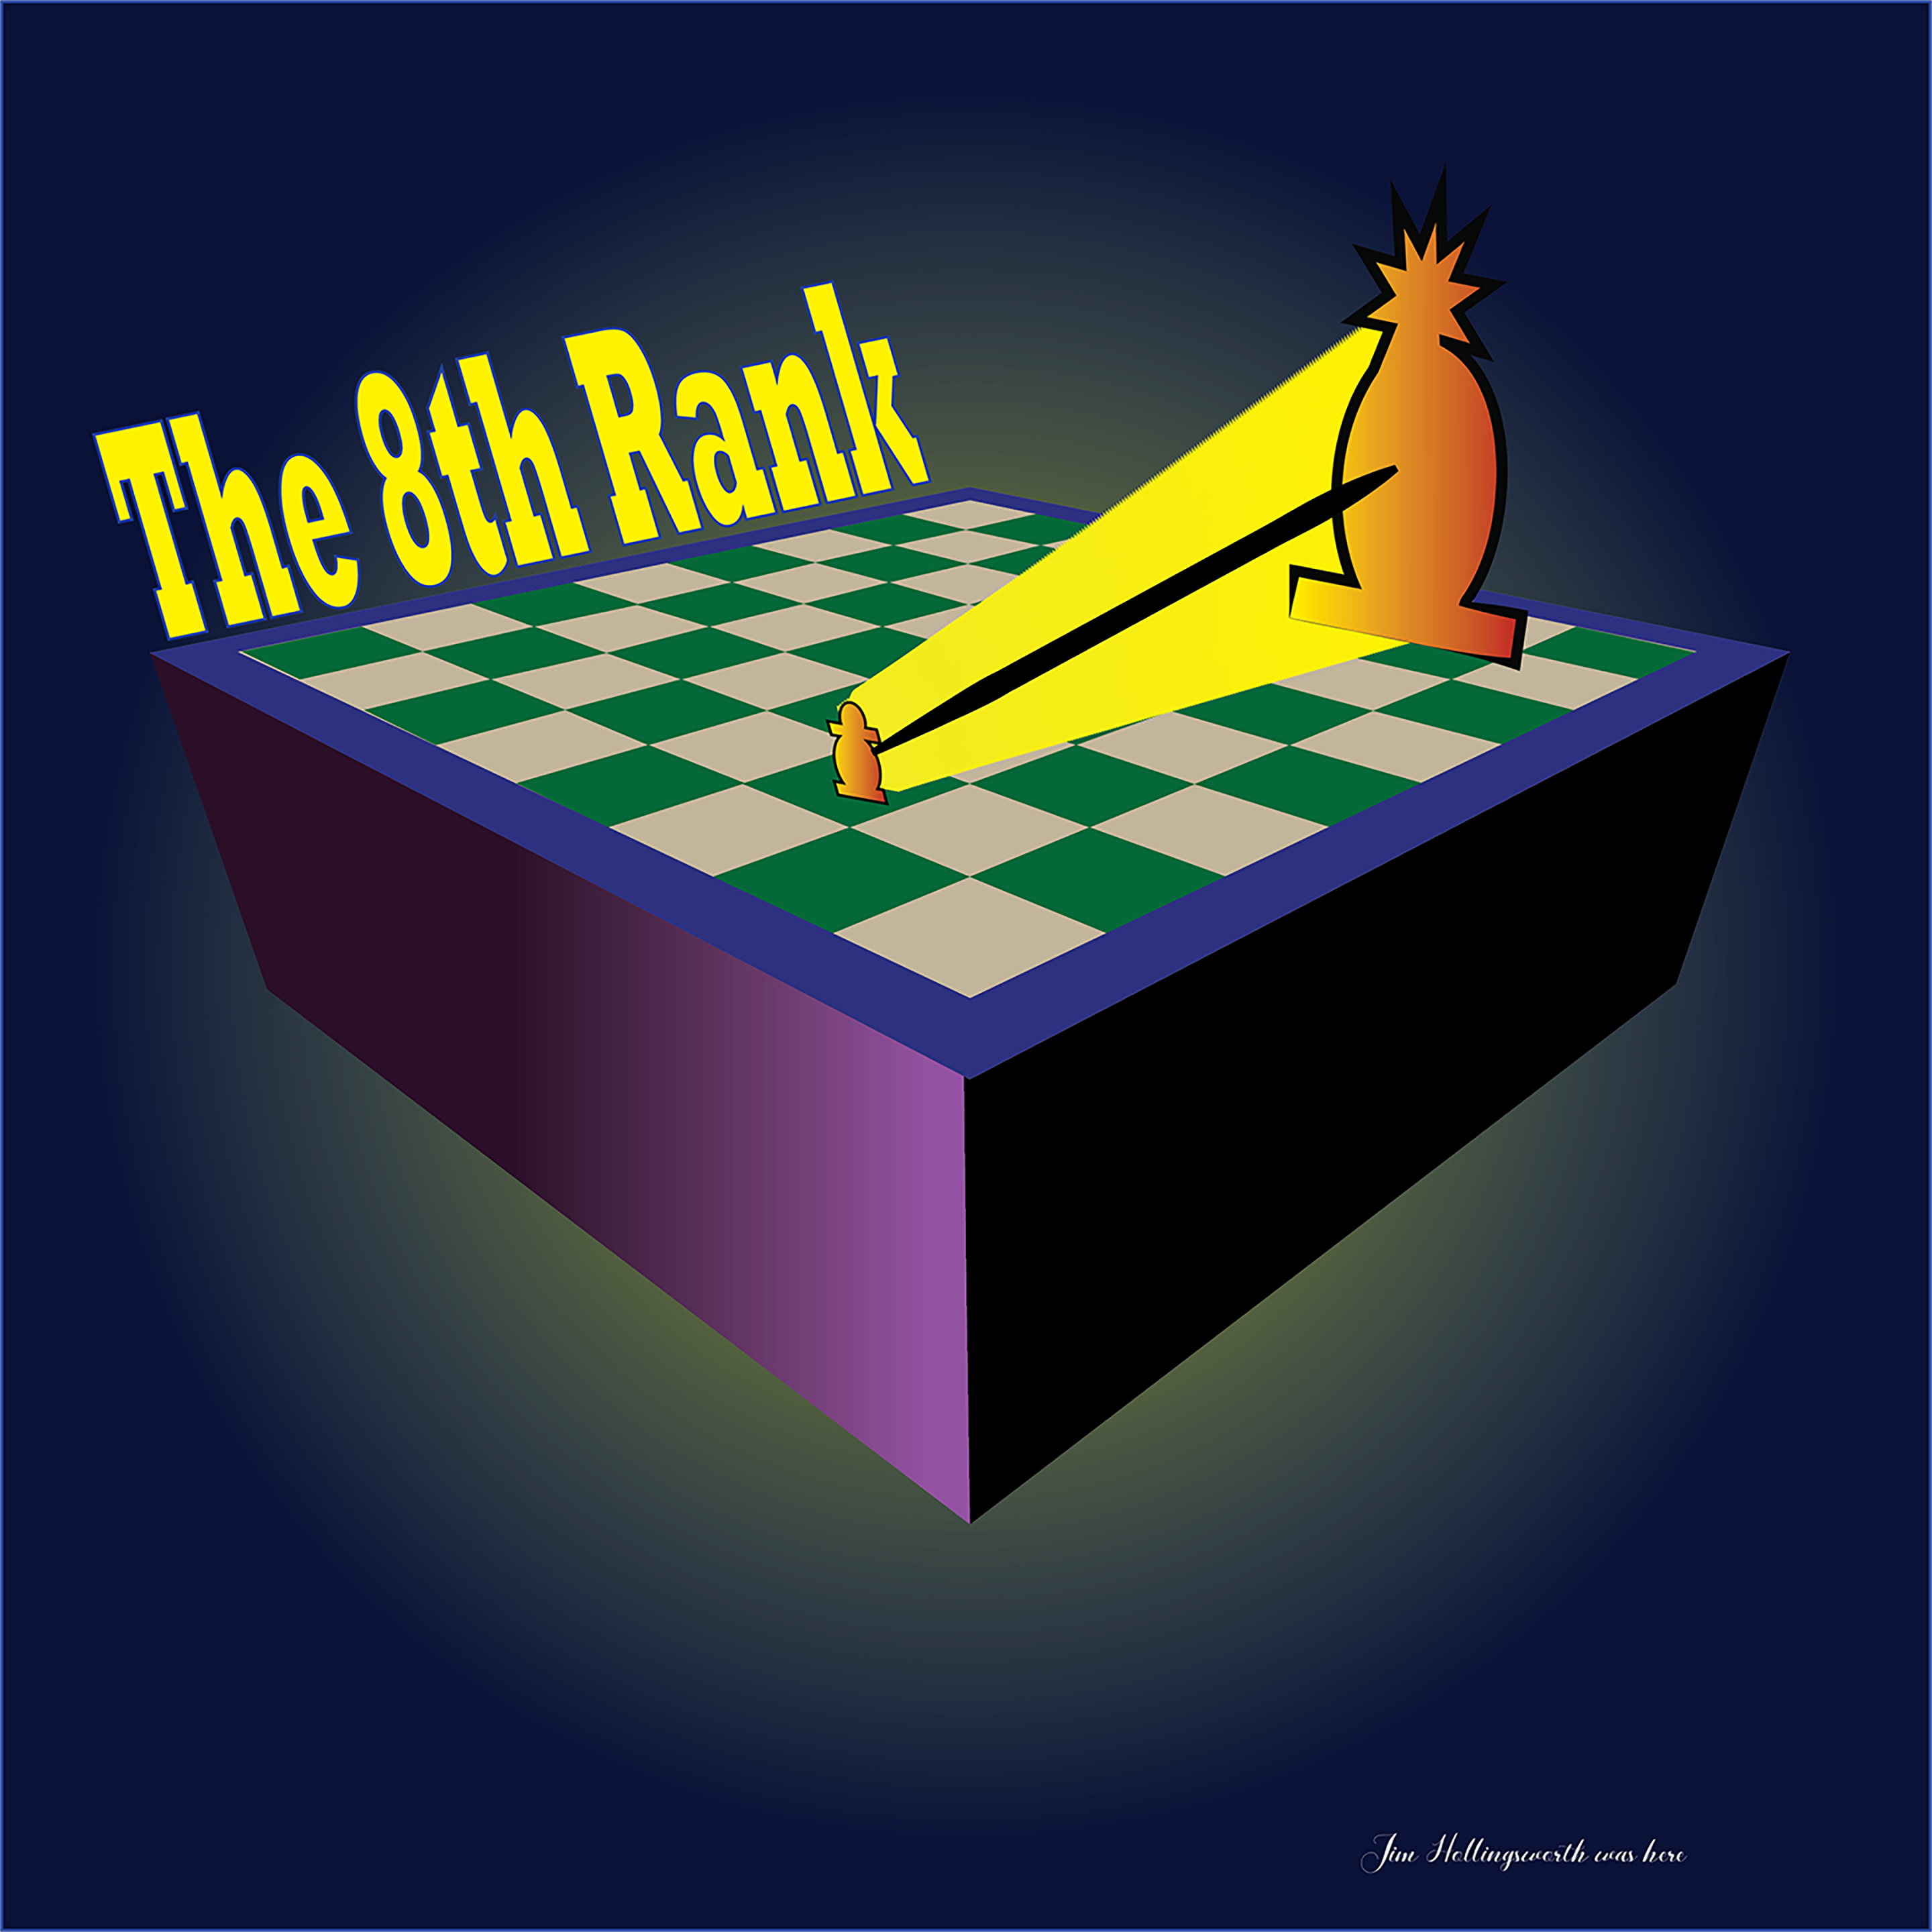 The 8th Rank - Jim Hollingsworth's entry in the 2023 Chess Journalists of America Awards Contest